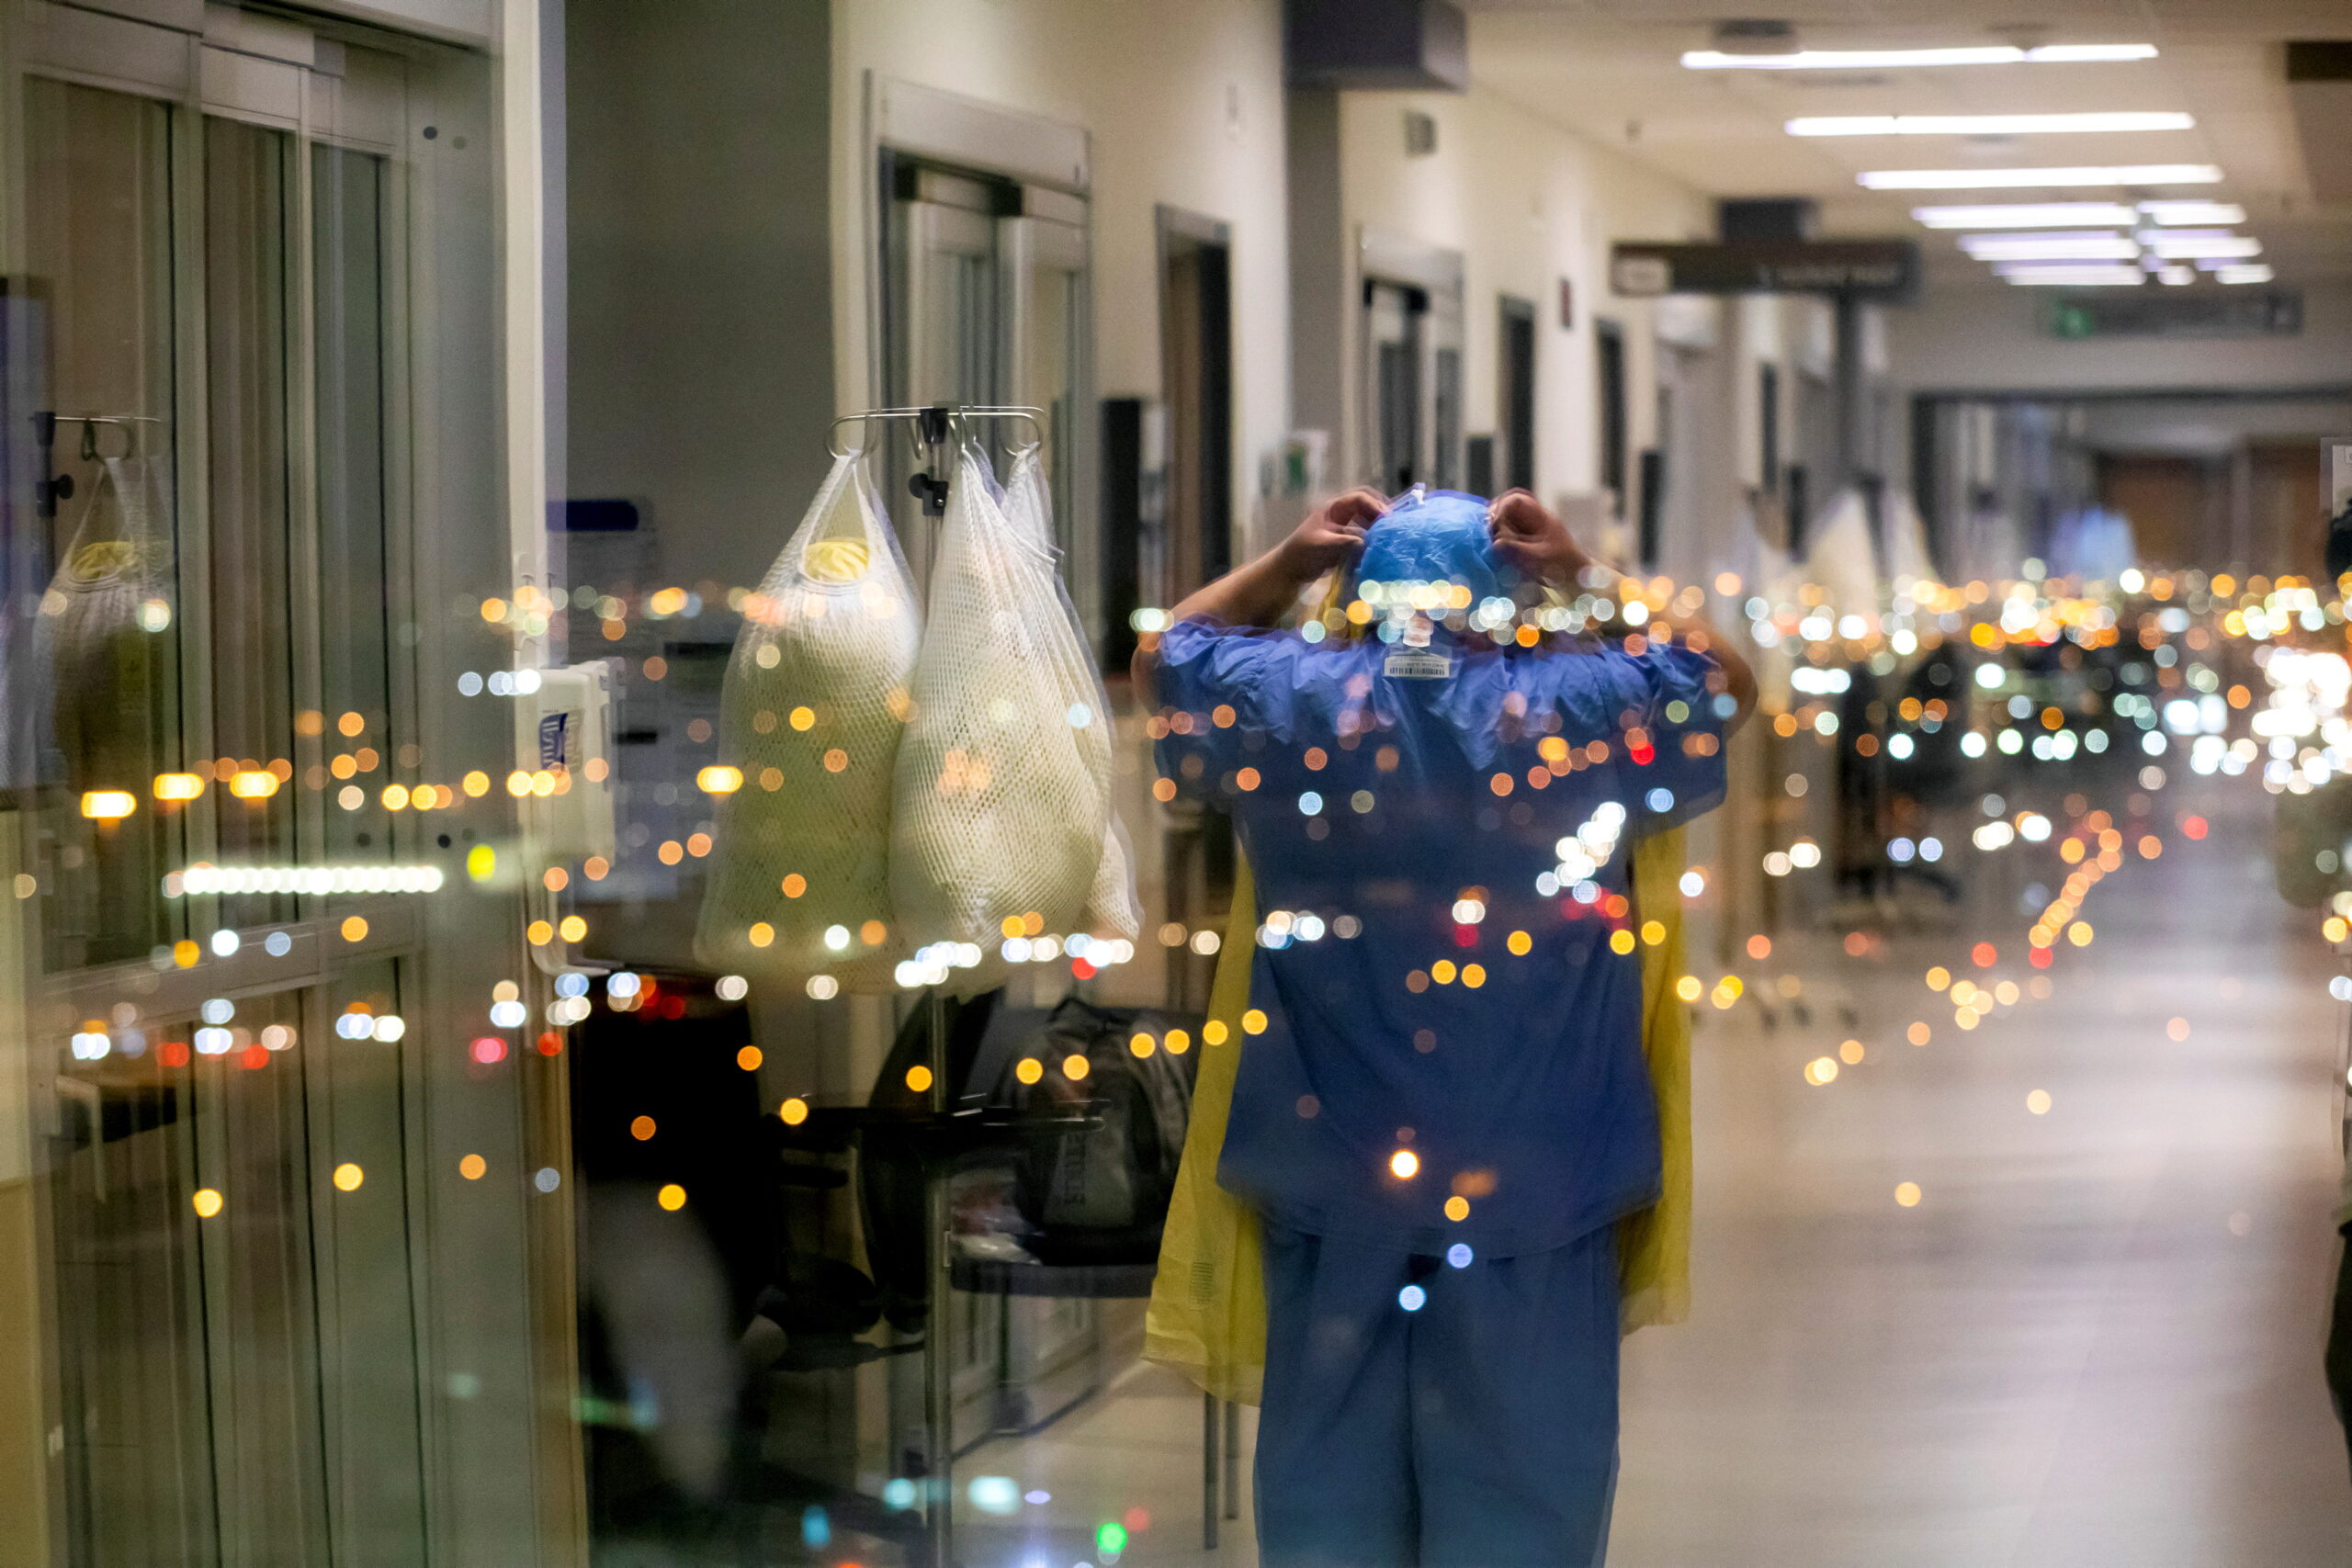 A nurse is reflected in a window as she puts on personal protective equipment to treat a COVID-19 patient inside the intensive care unit of Humber River Hospital in Toronto on April 20, 2021.